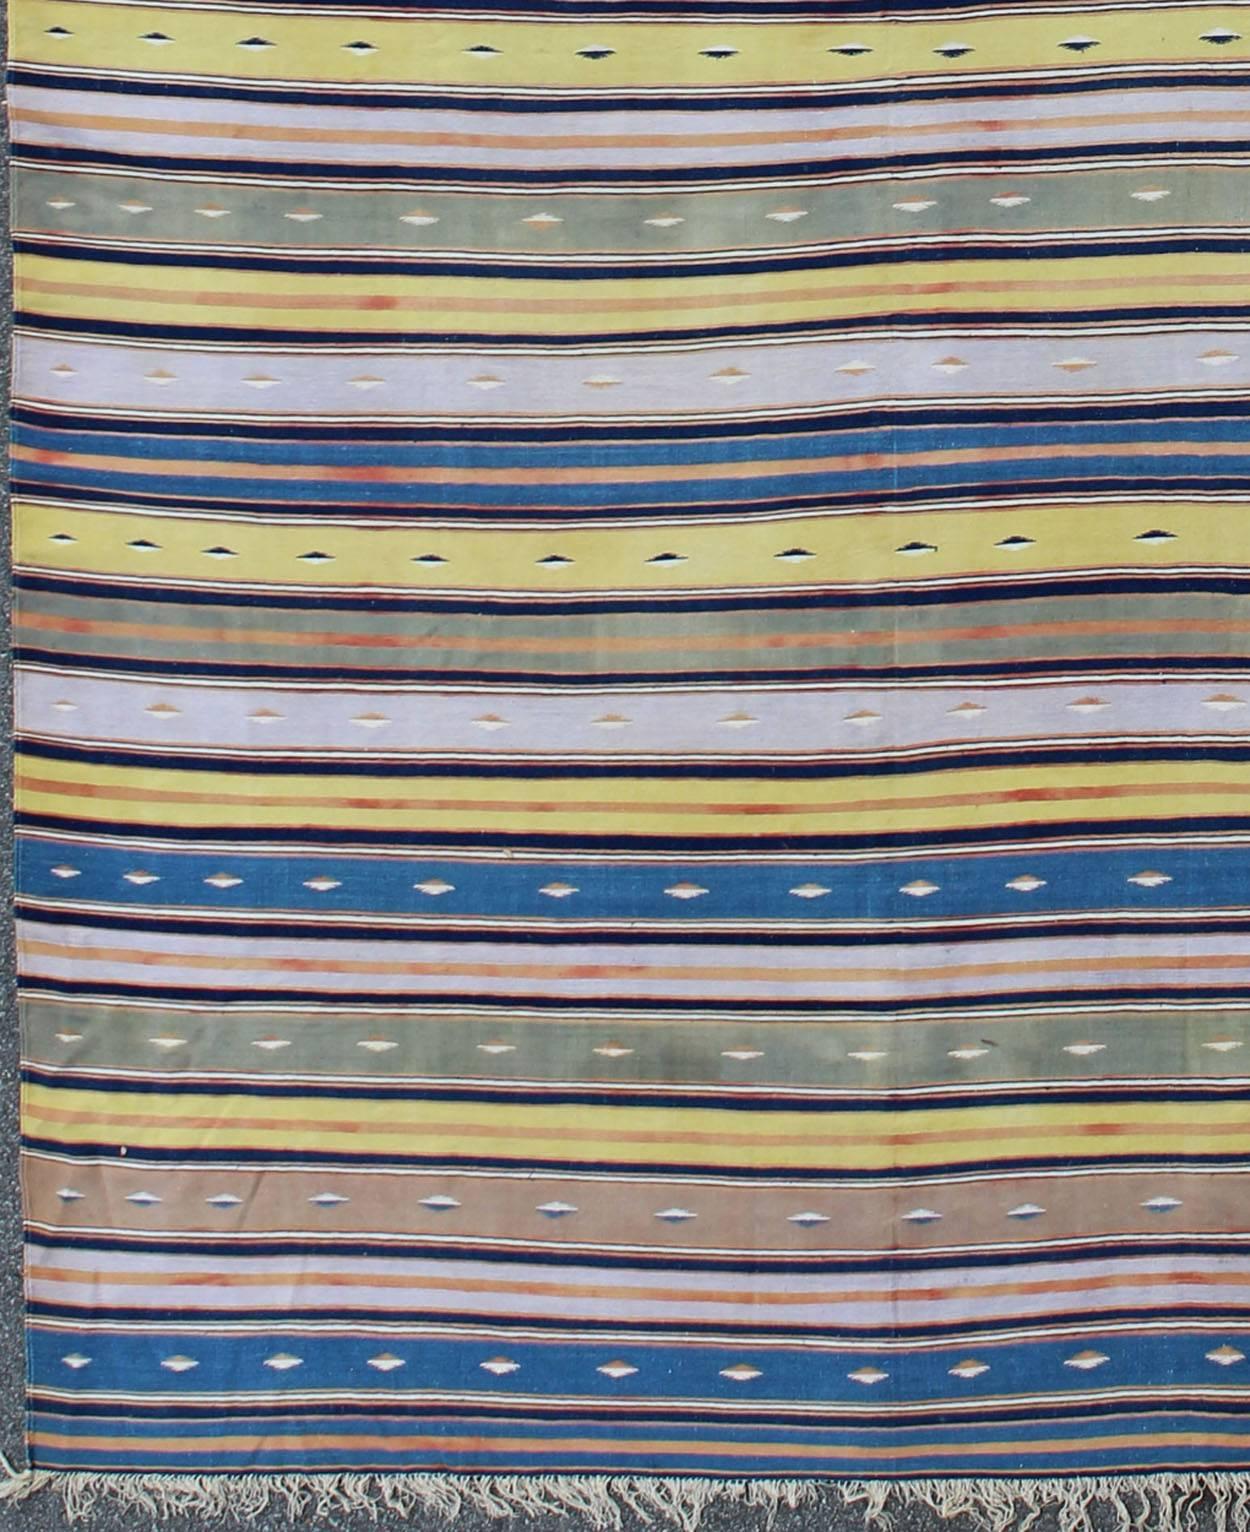 Kilim Long Vintage Cotton Dhurrie Rug with Stripe design in Blue, Yellow Green & Brown